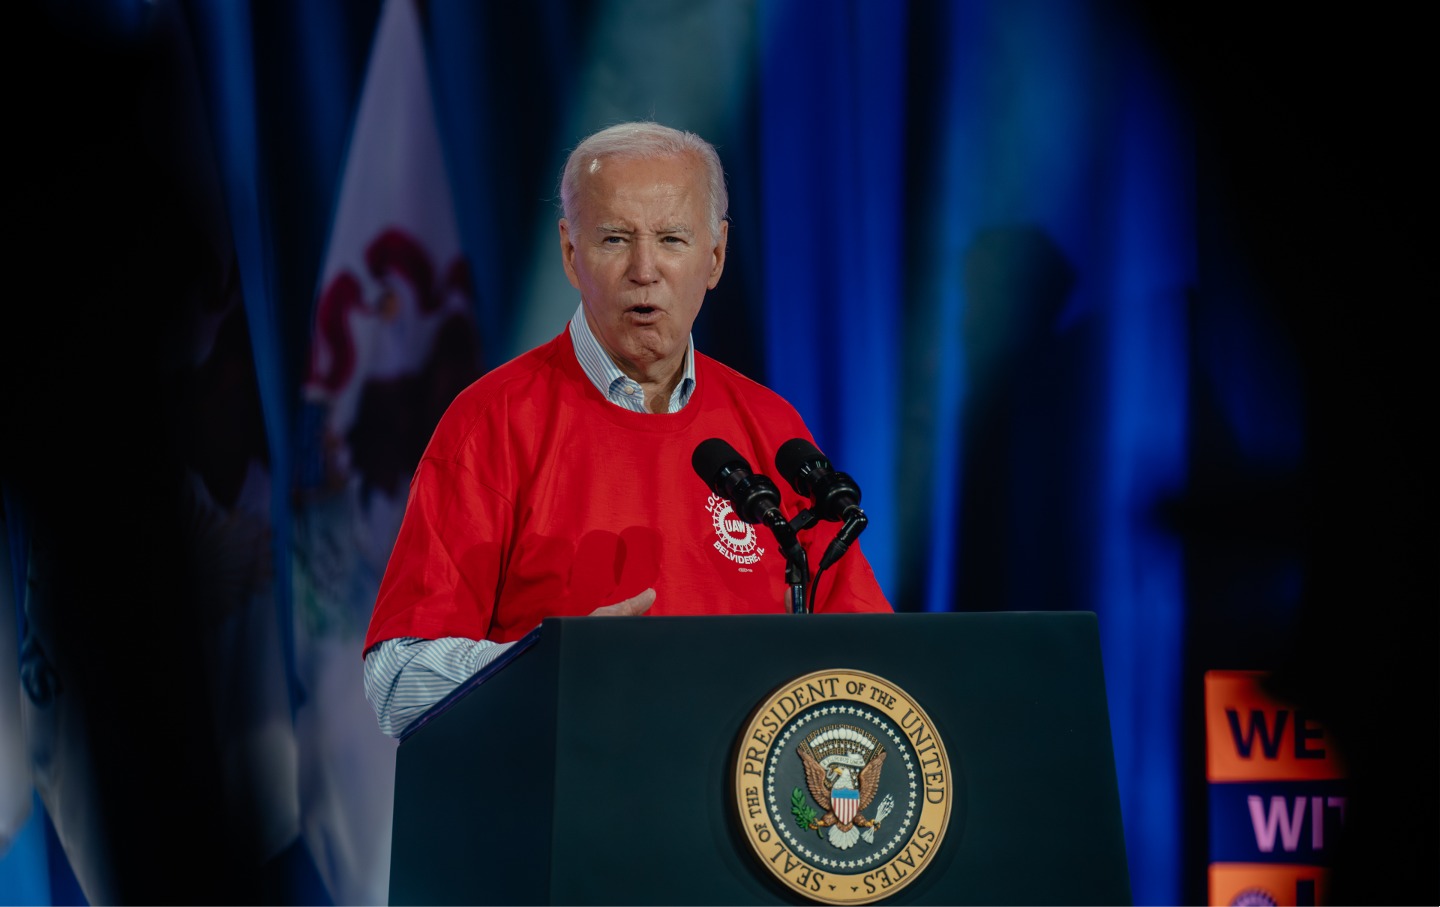 US President Joe Biden speaks during an event at the Community Building Complex of Boone County in Belvidere, Illinois, US, on Thursday, Nov. 9, 2023.